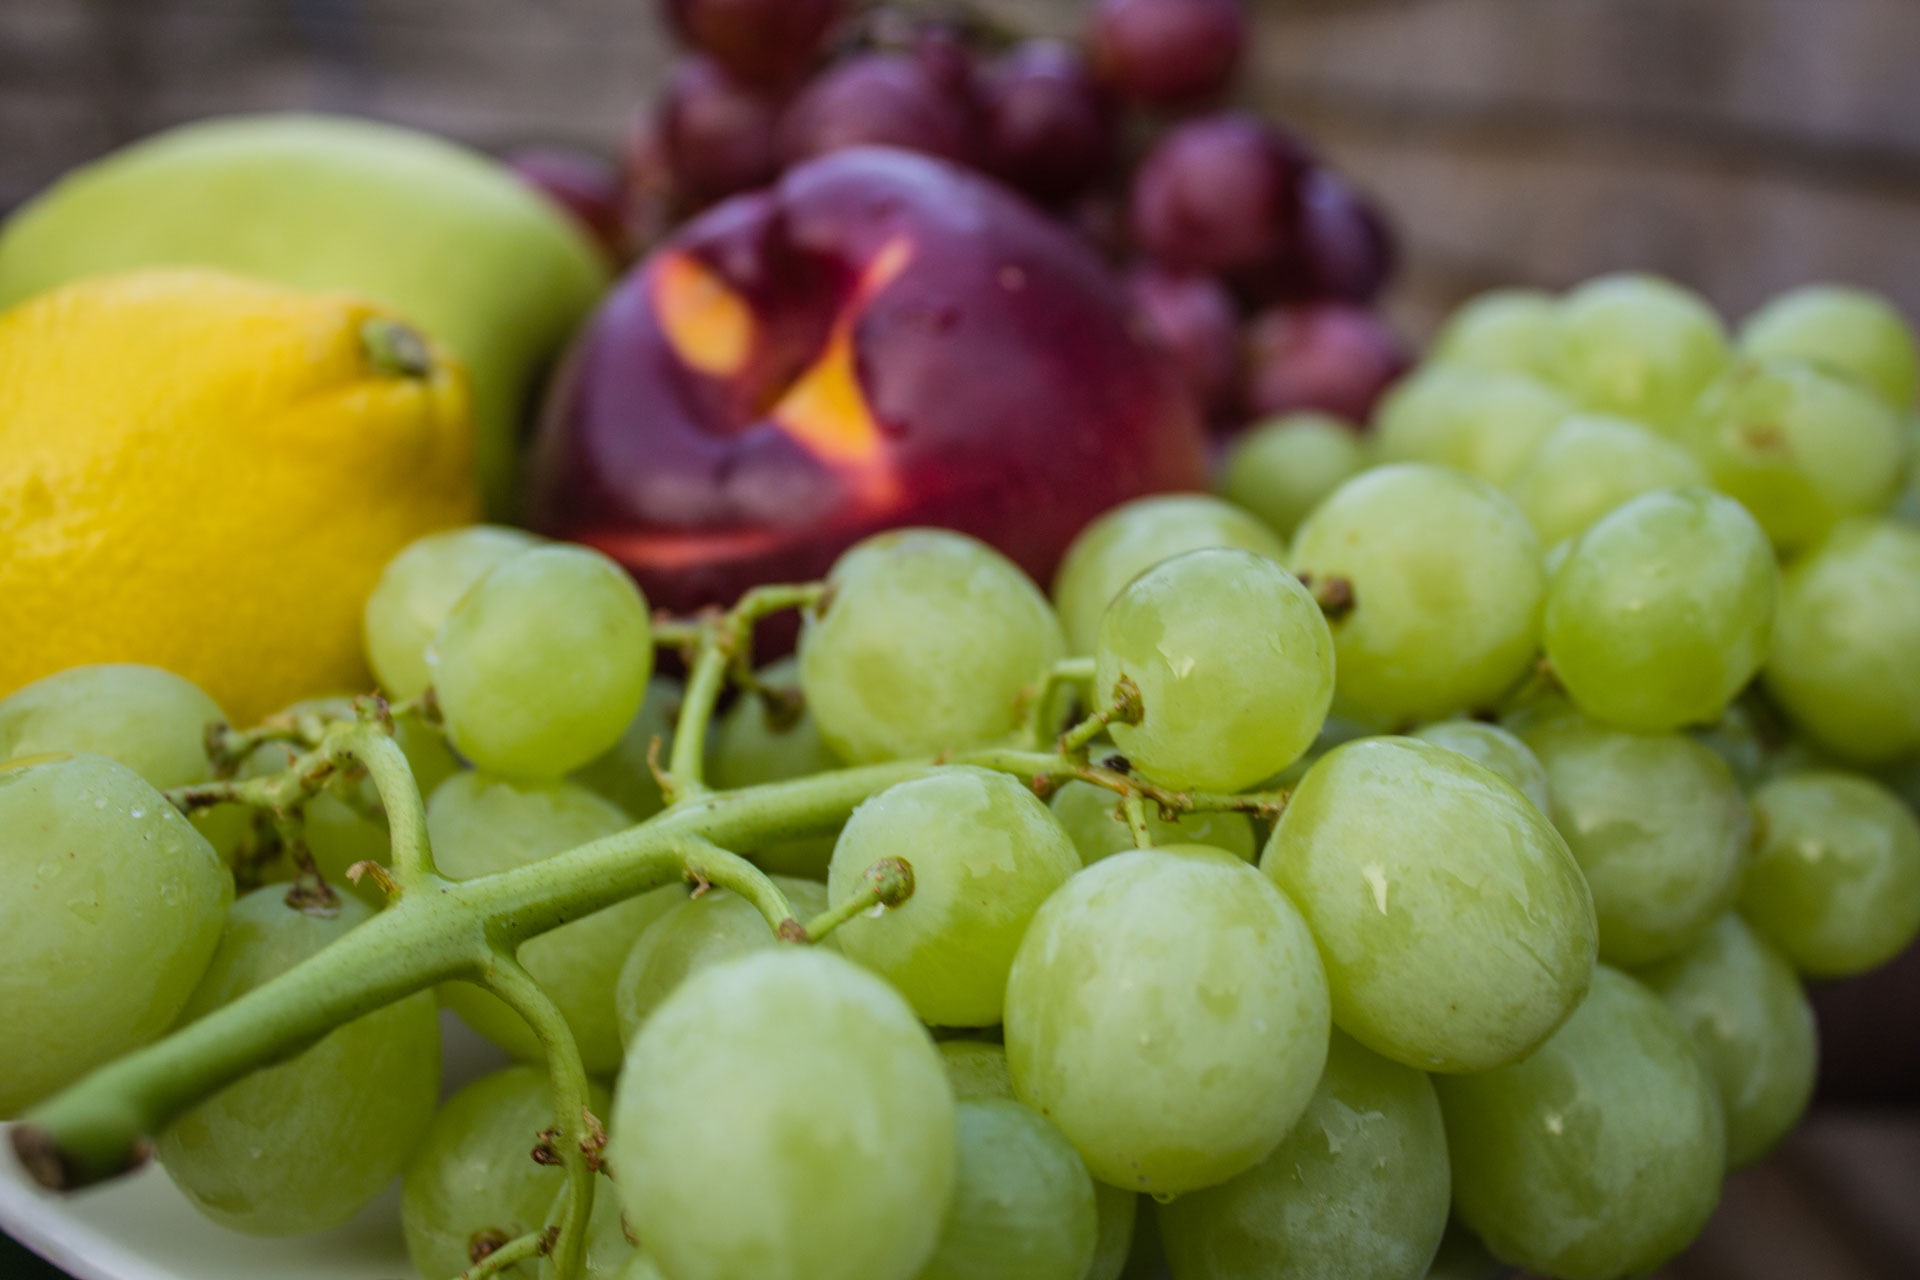 green grapes and red apple fruit